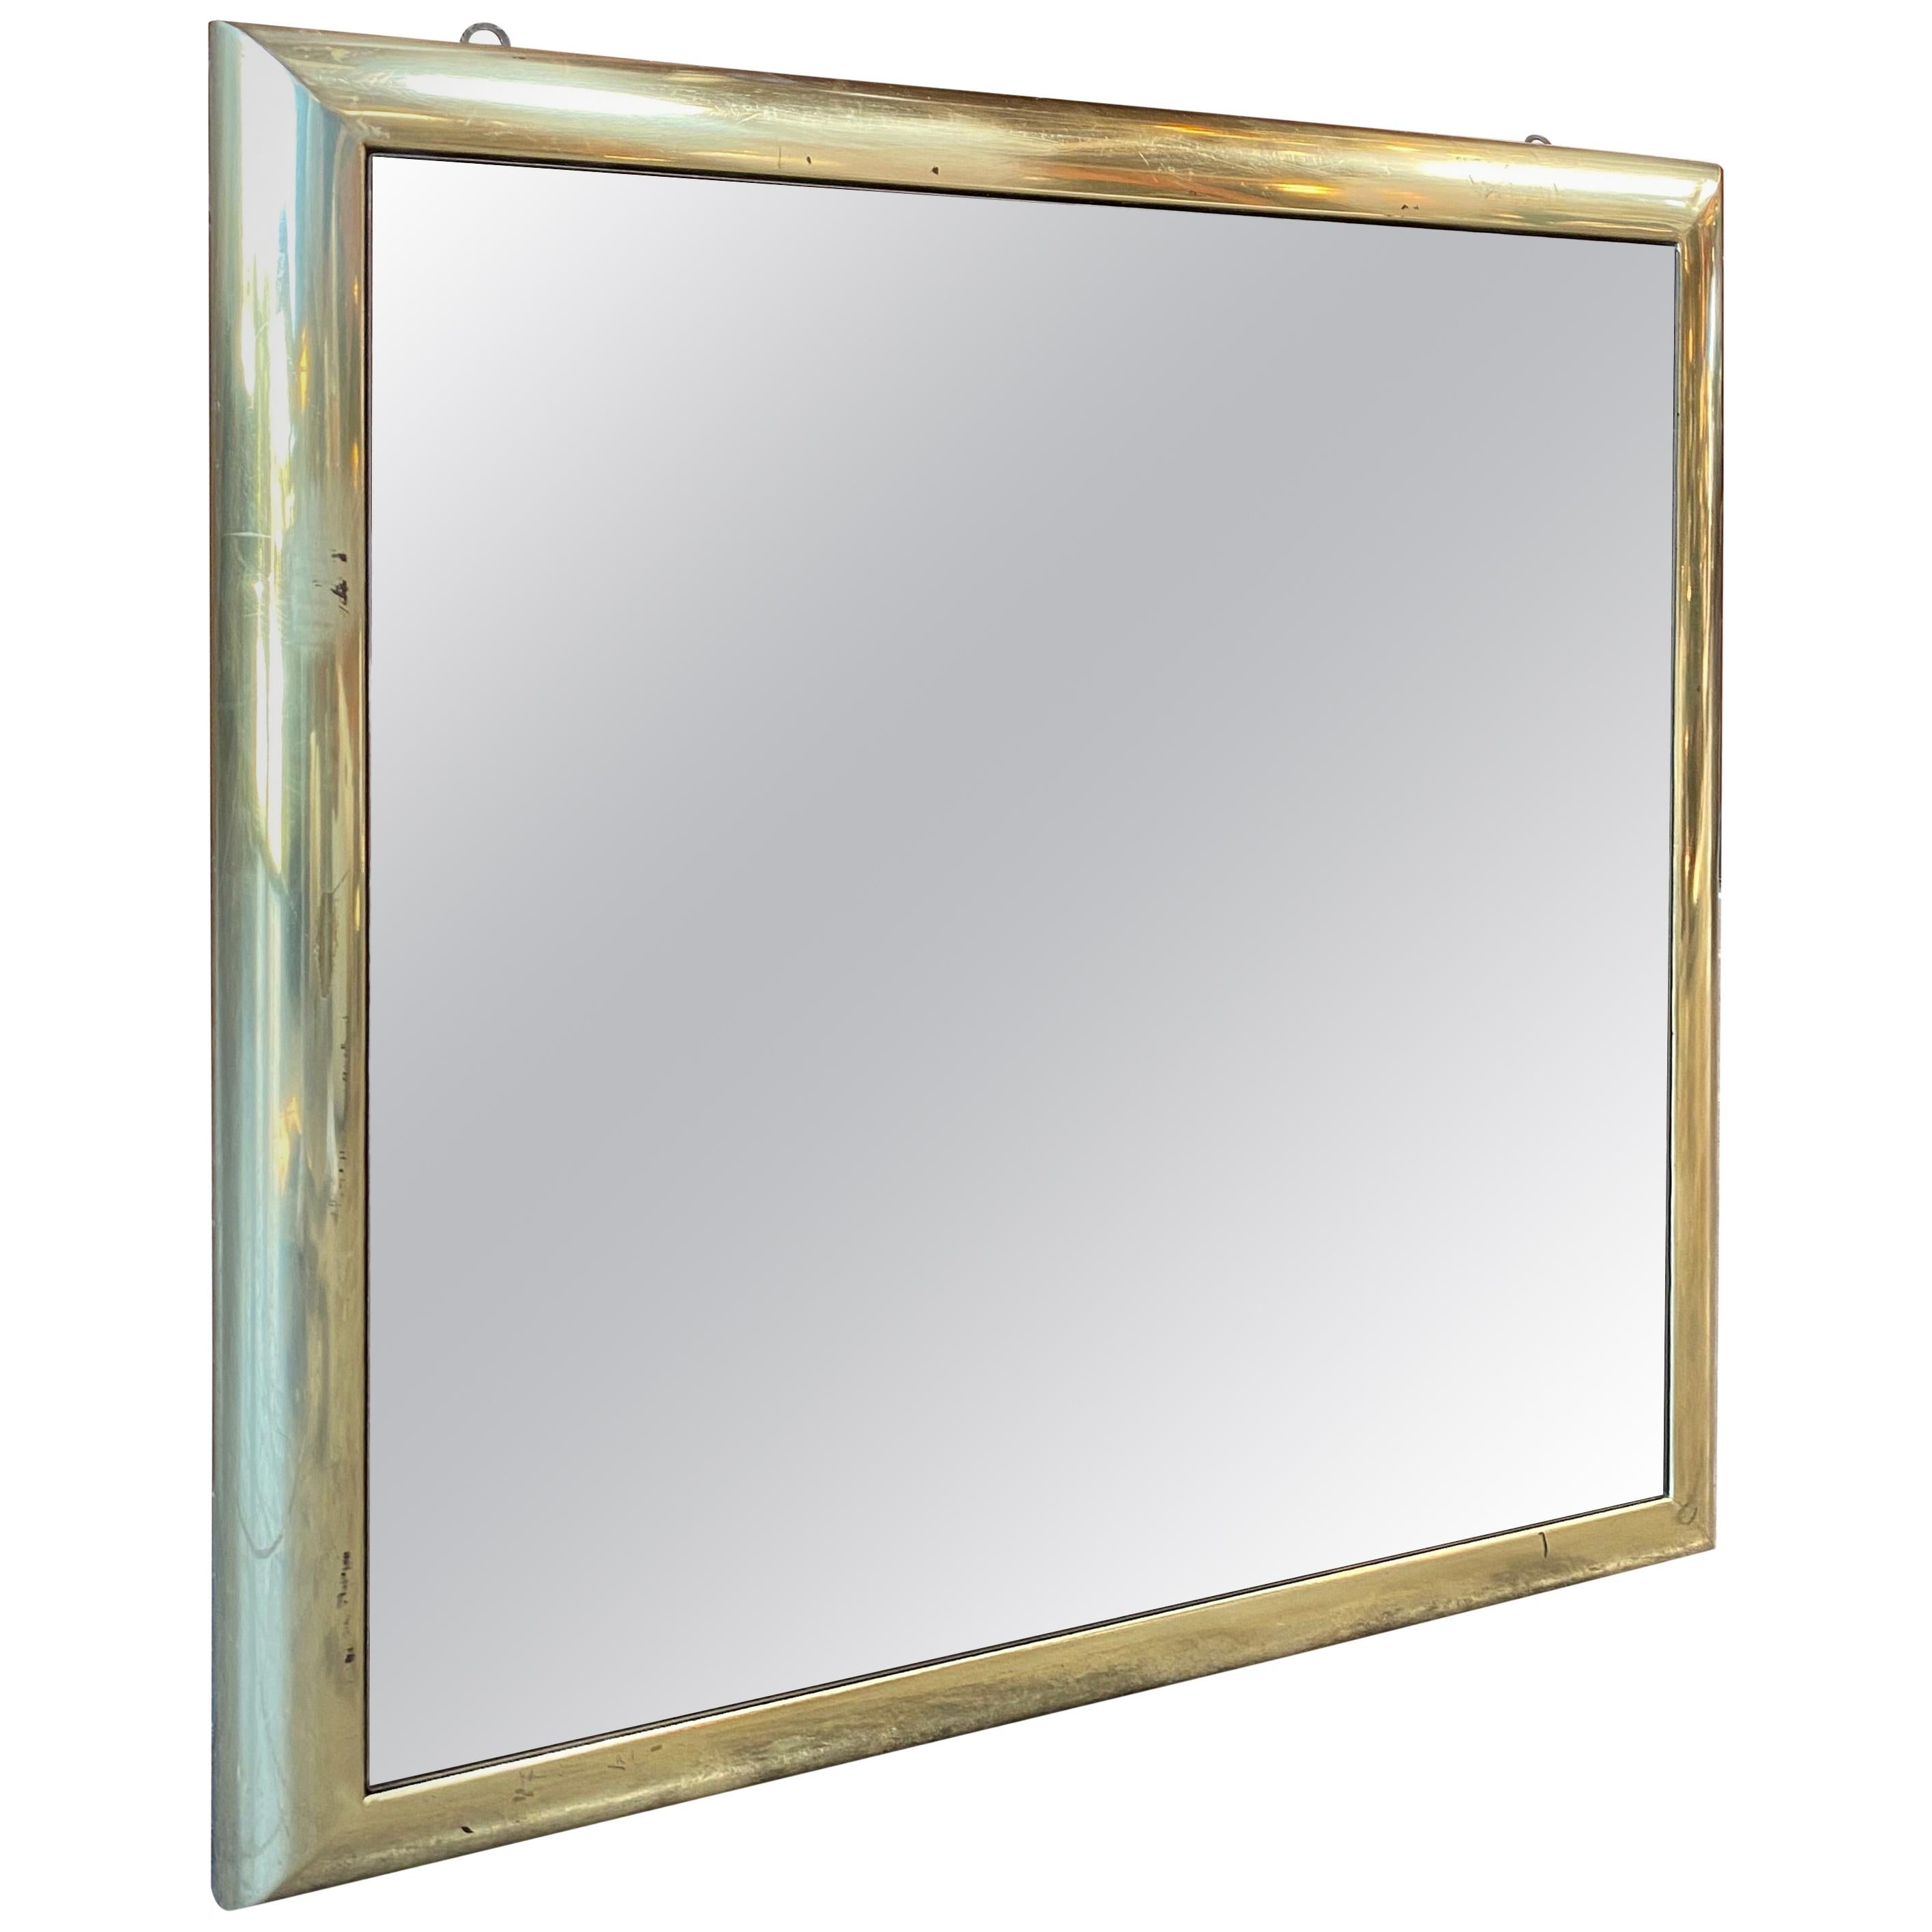 Italian Vintage Square Wall Mirror in Brass, 1960s